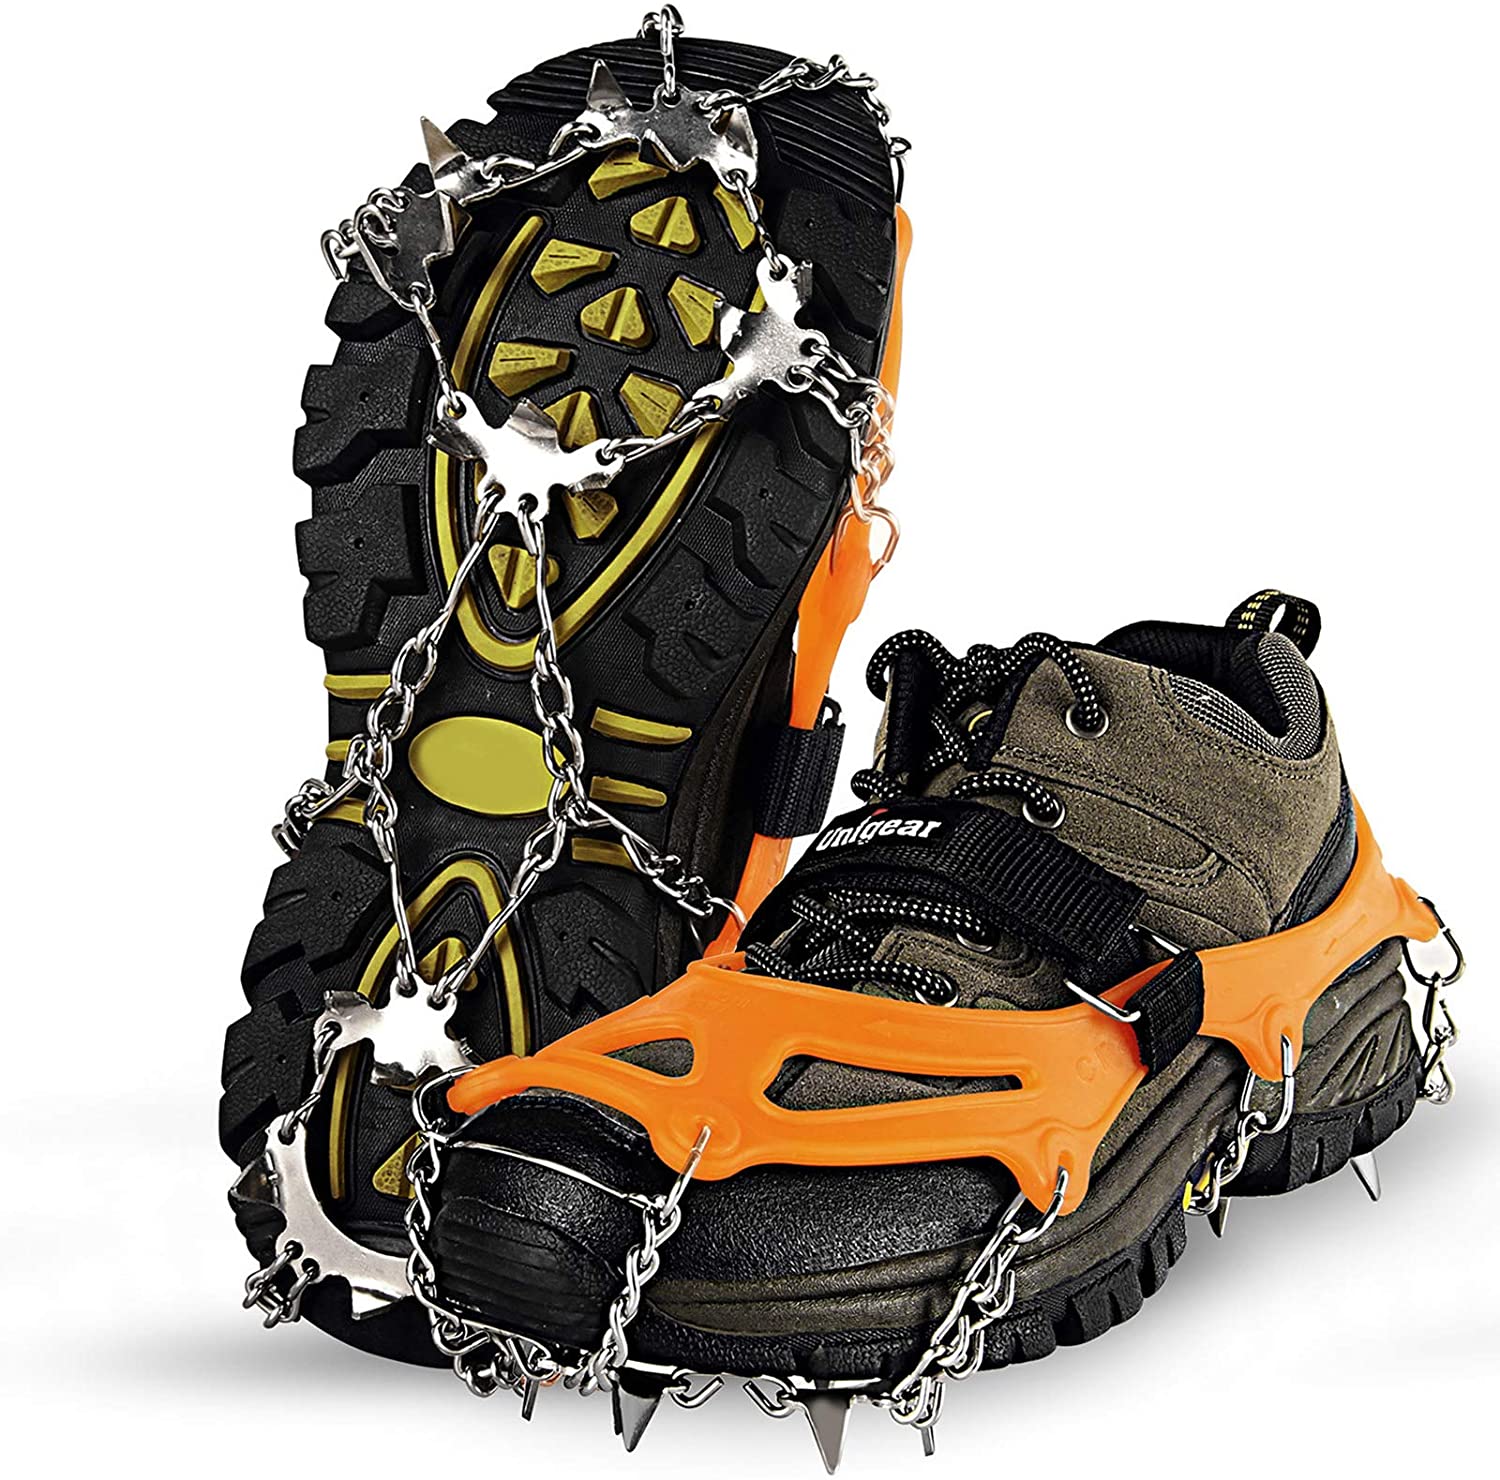 Veriga ProTrack Professional Multi-Use Crampons Ice Traction Cleats 